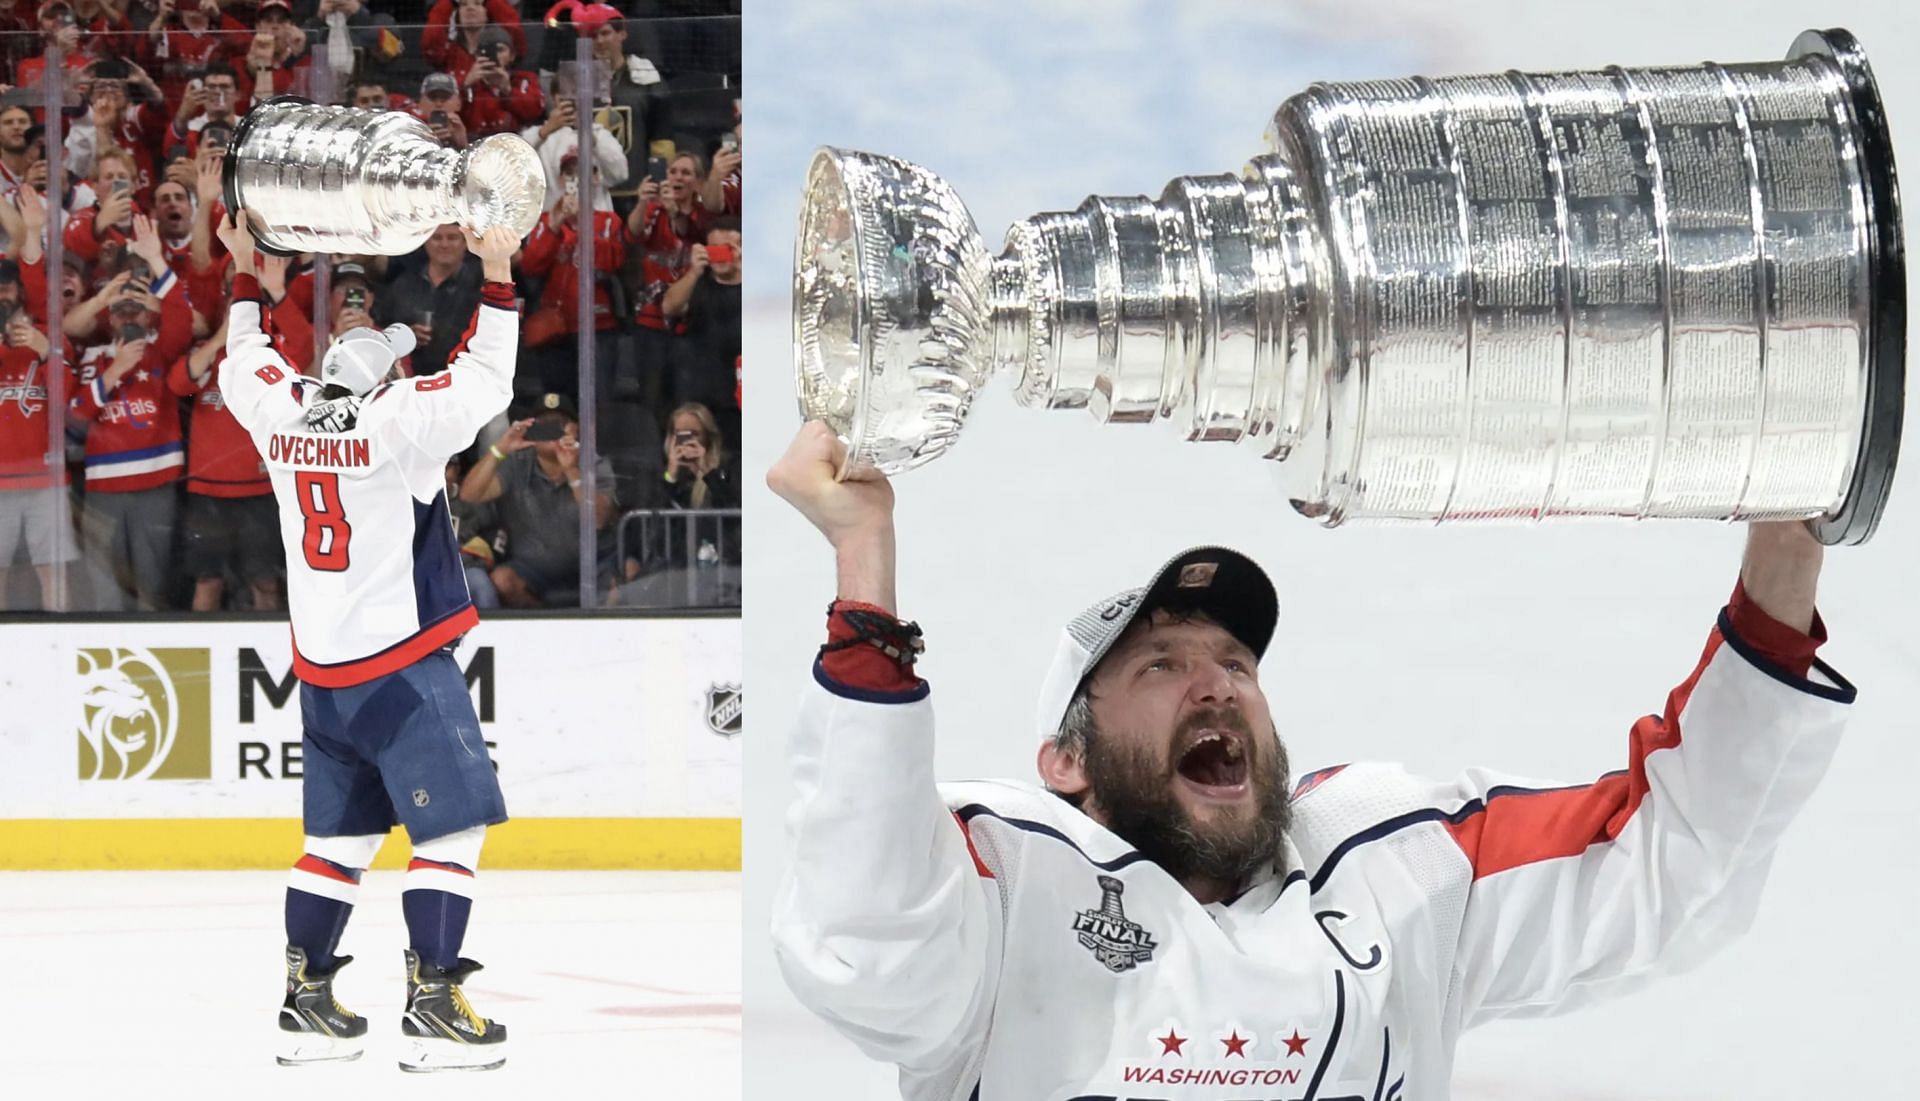 Ovechkin and the Caps went for a swim and celebrated Stanley Cup